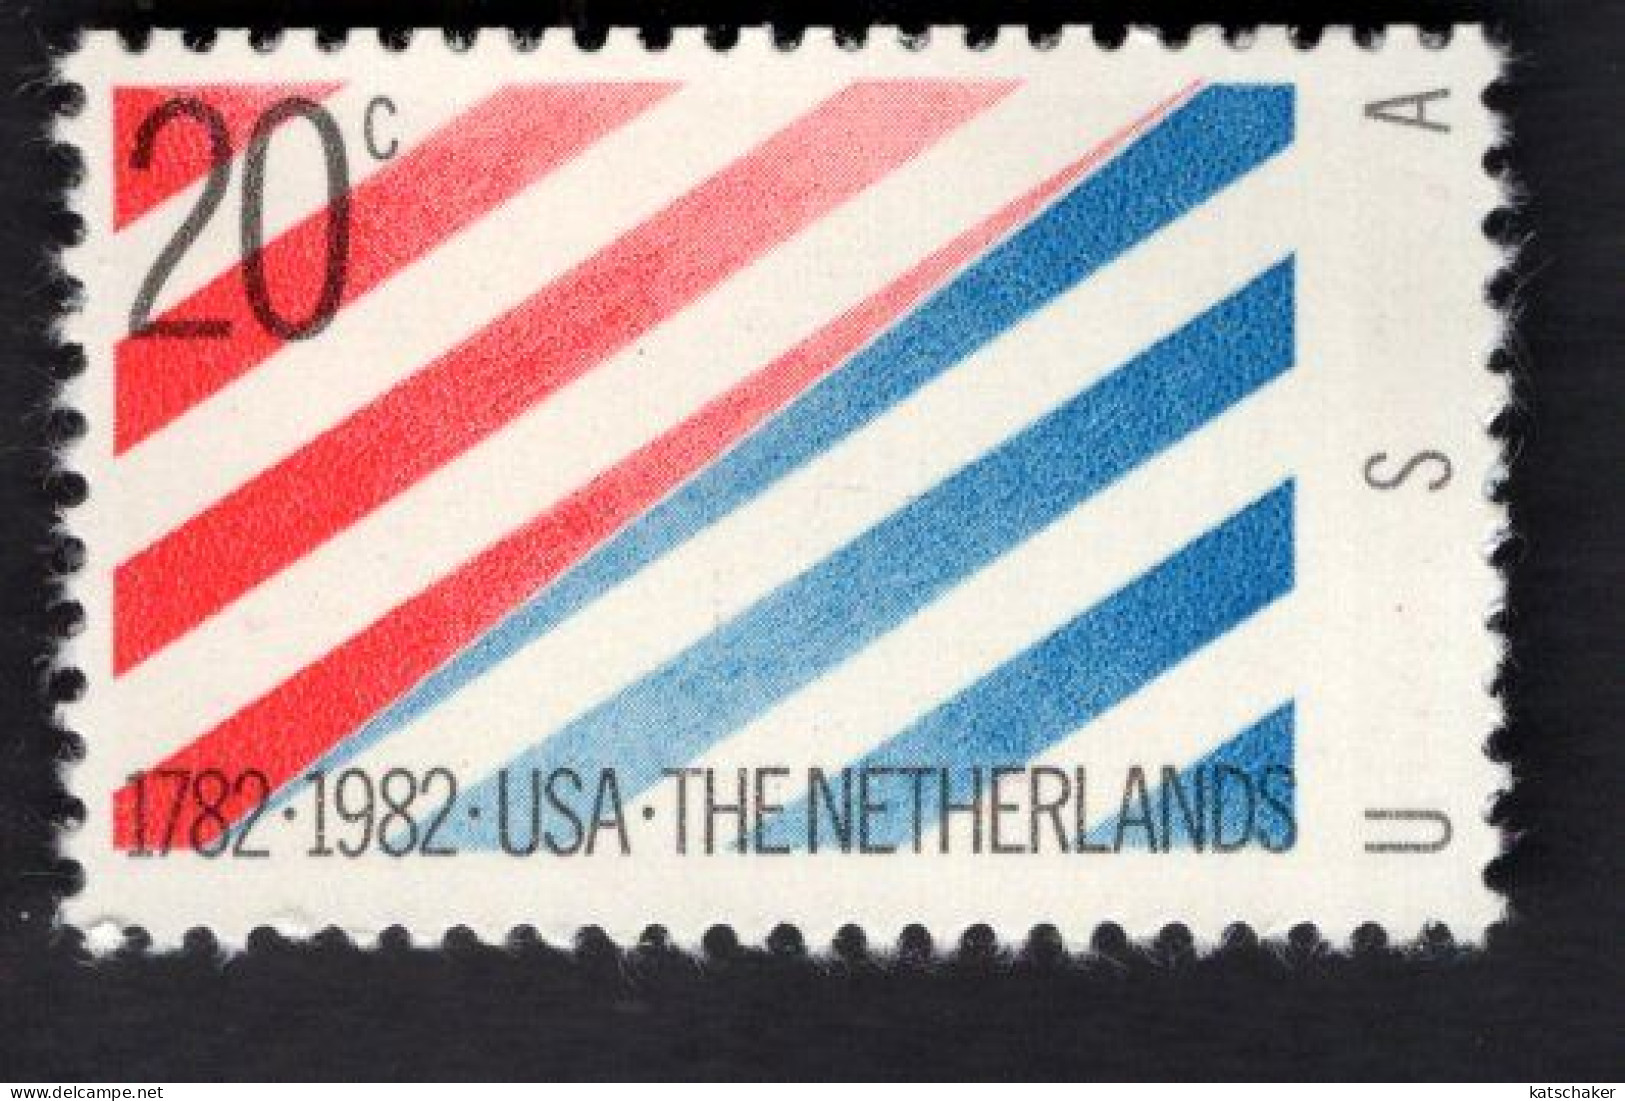 206998750 1982 SCOTT 2003 (XX) POSTFRIS MINT NEVER HINGED) - US - NETHERLANDS 200TH ANNIV DIPLOMATIC RECOGNITION - Unused Stamps